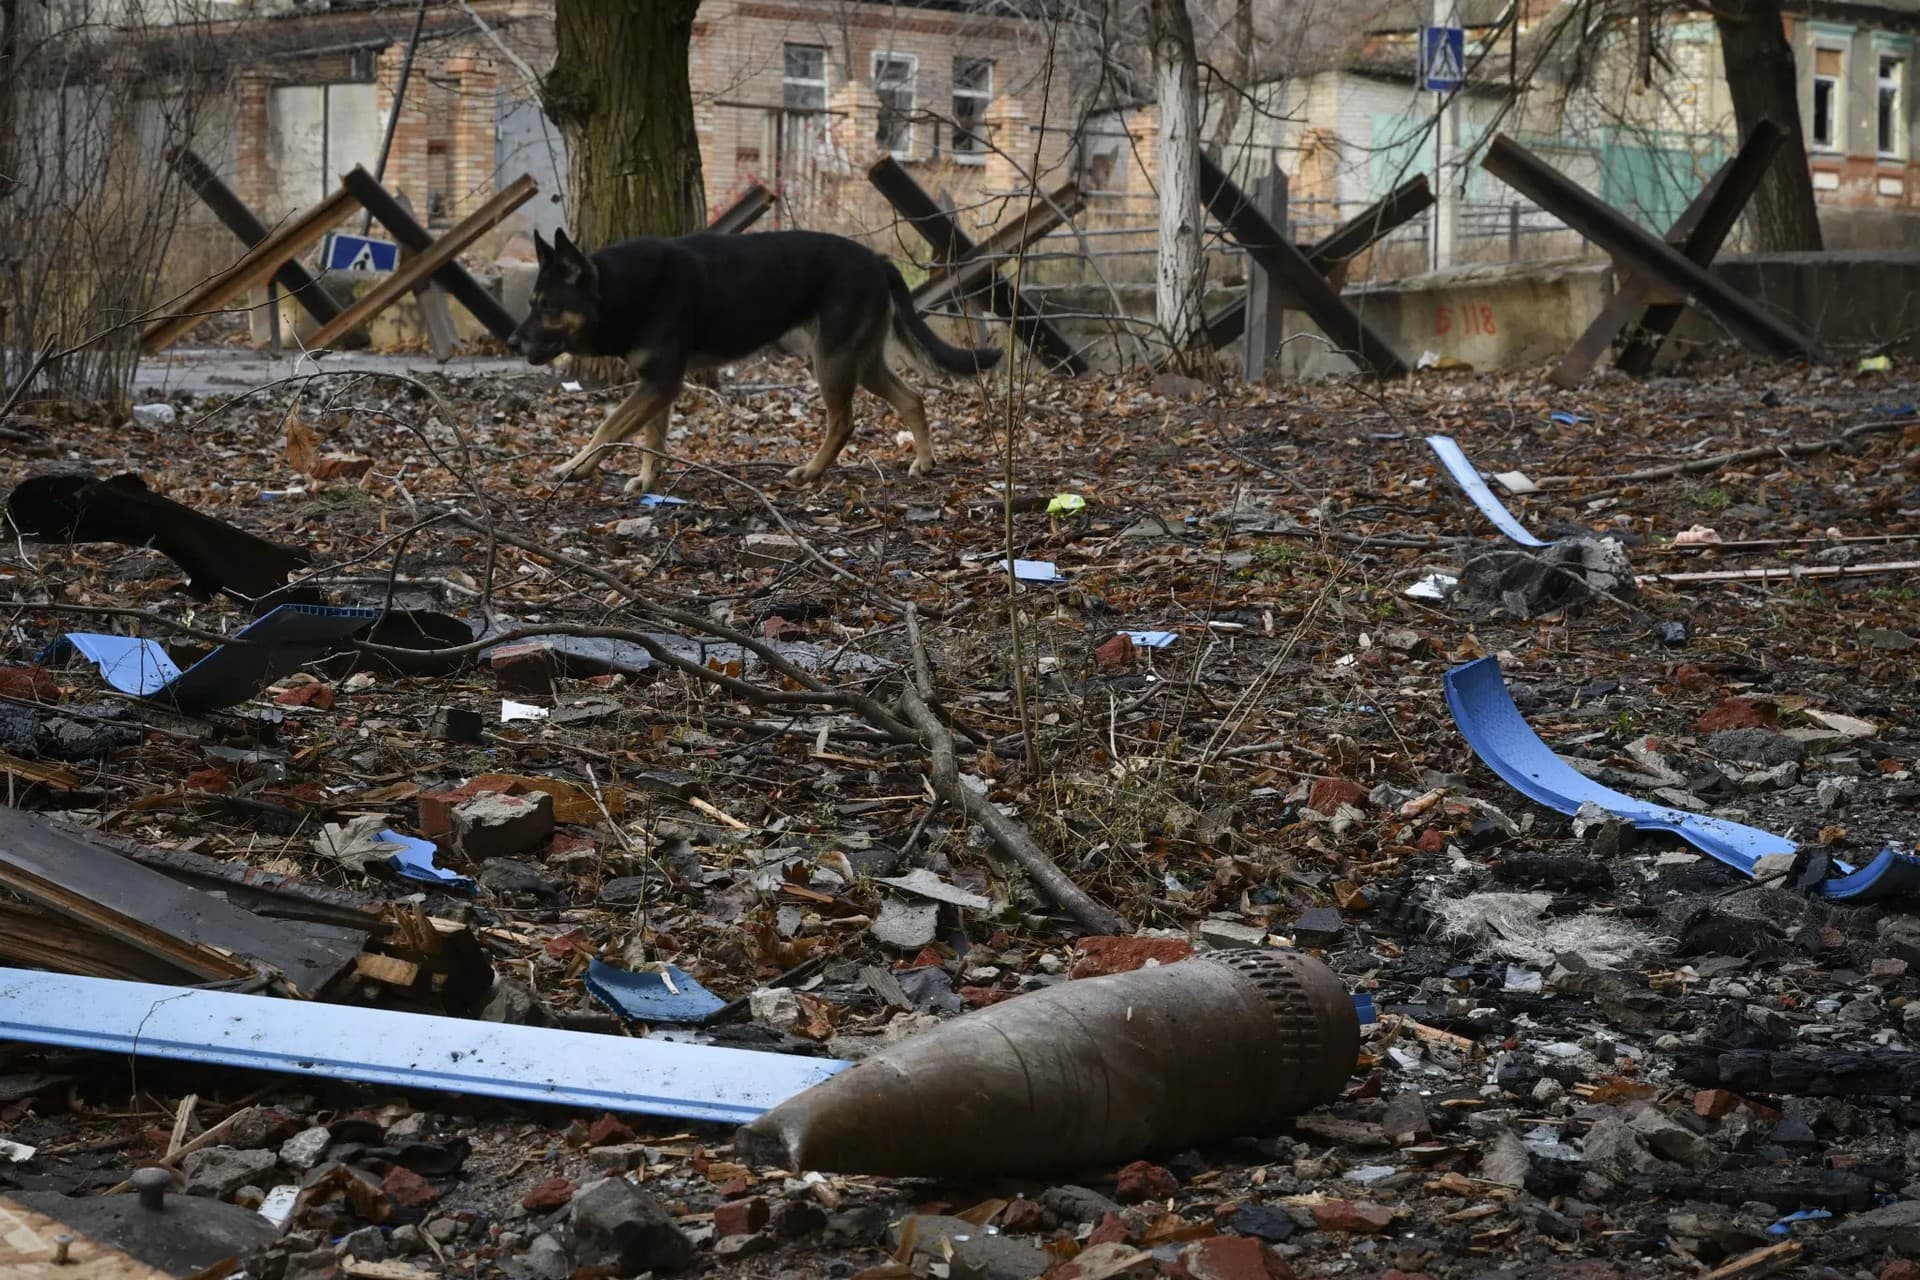 A dog passes by an unexploded shell in Bakhmut